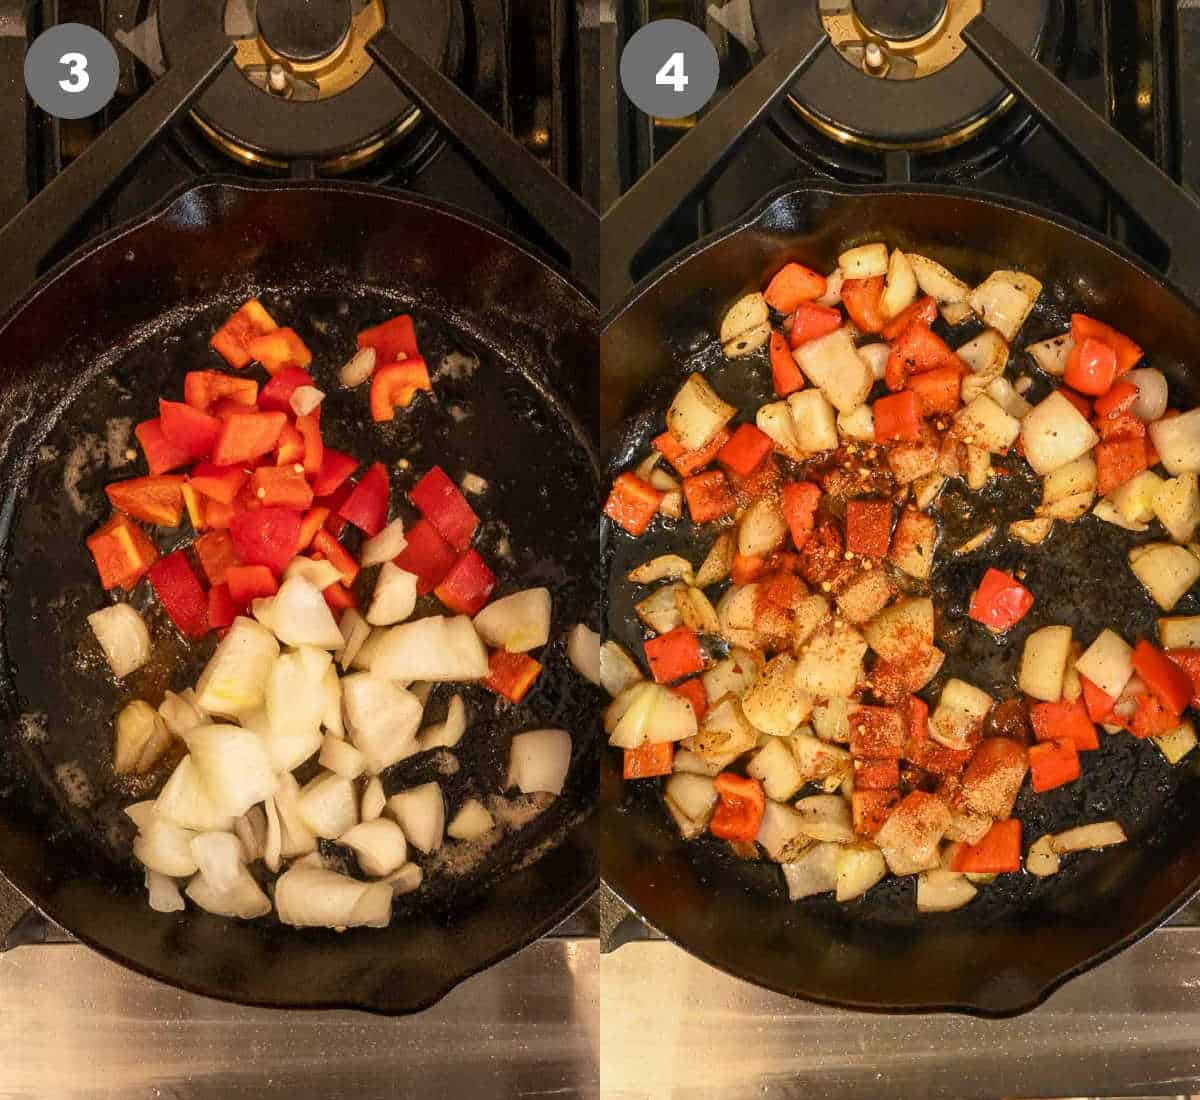 Red bell pepper and onion sauteed in a cast iron skillet.